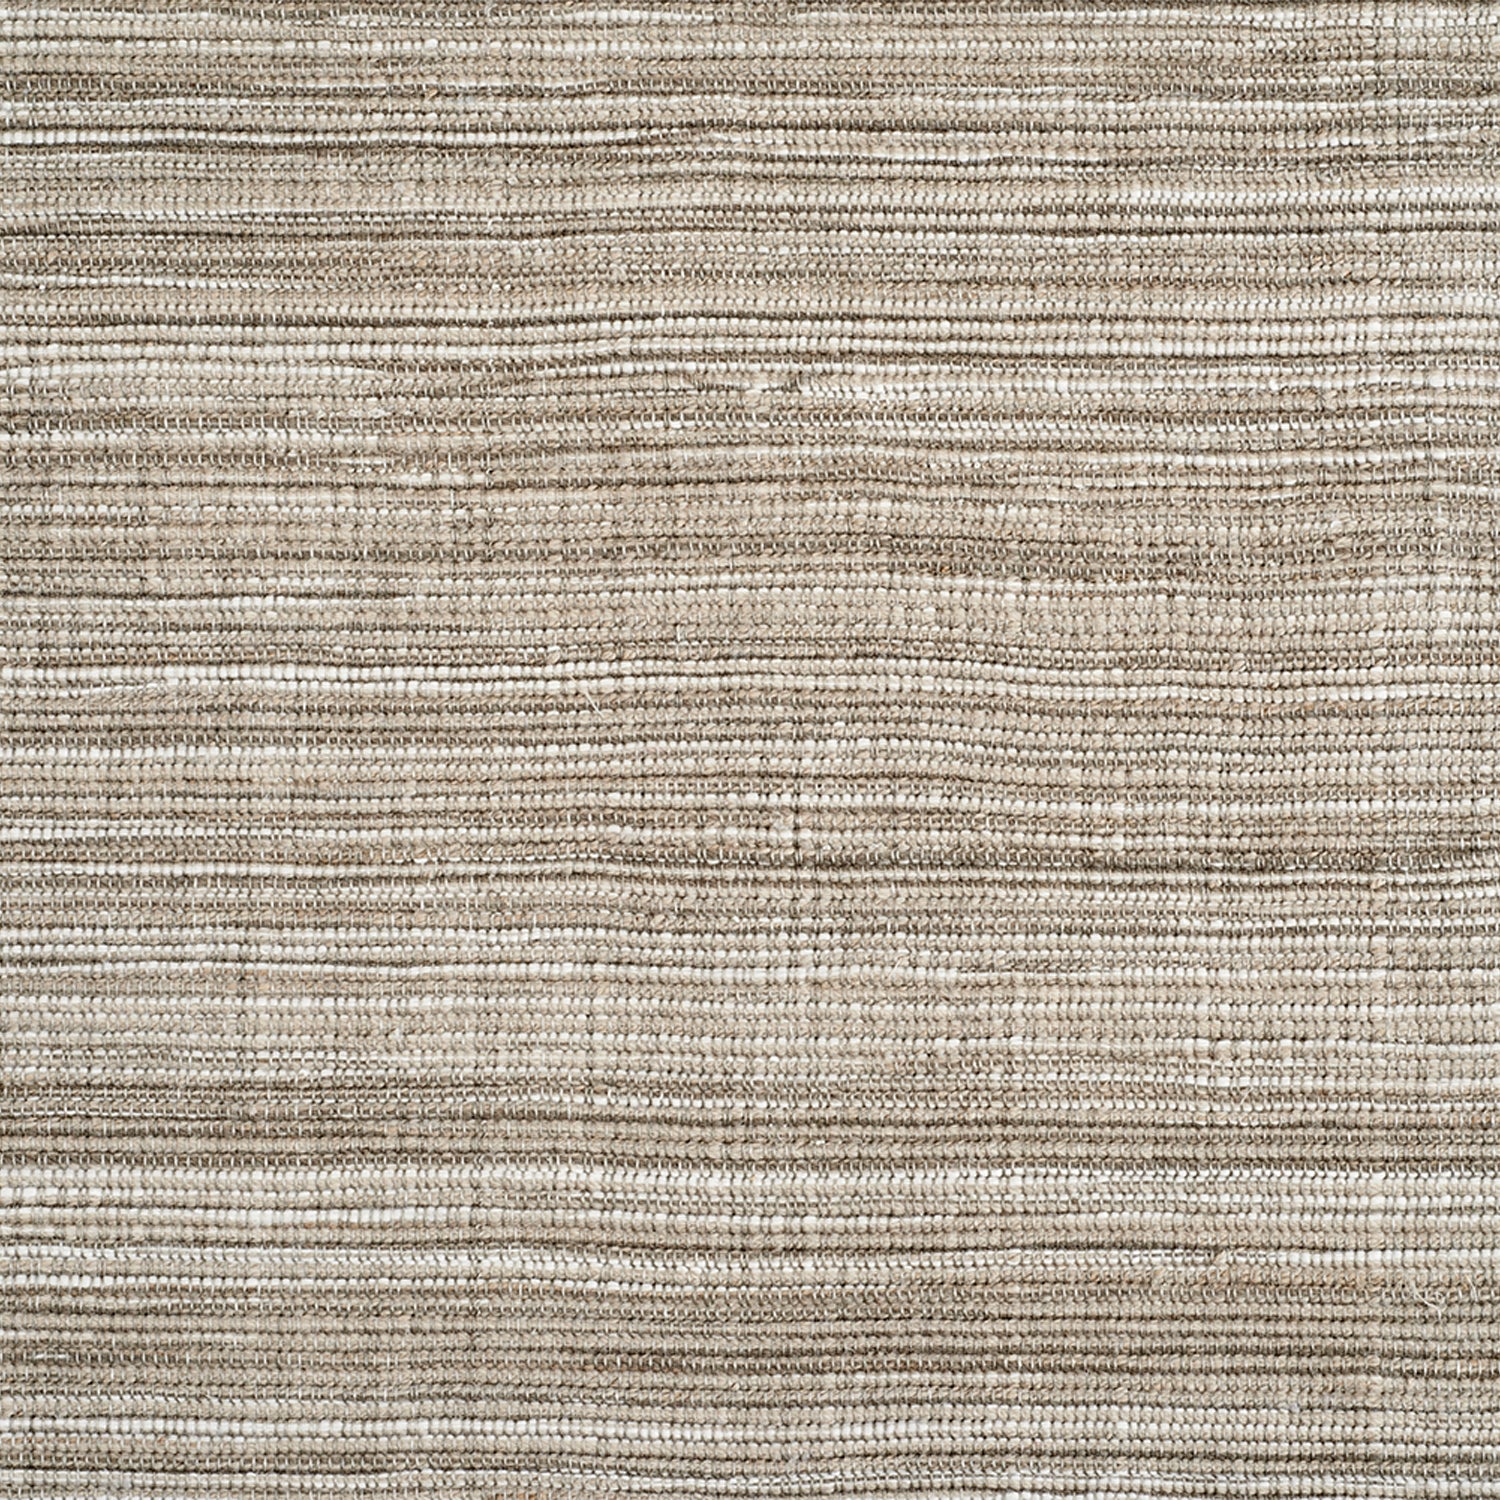 Wool-blend broadloom carpet swatch in a flat weave in mottled shades of white, brown and tan.